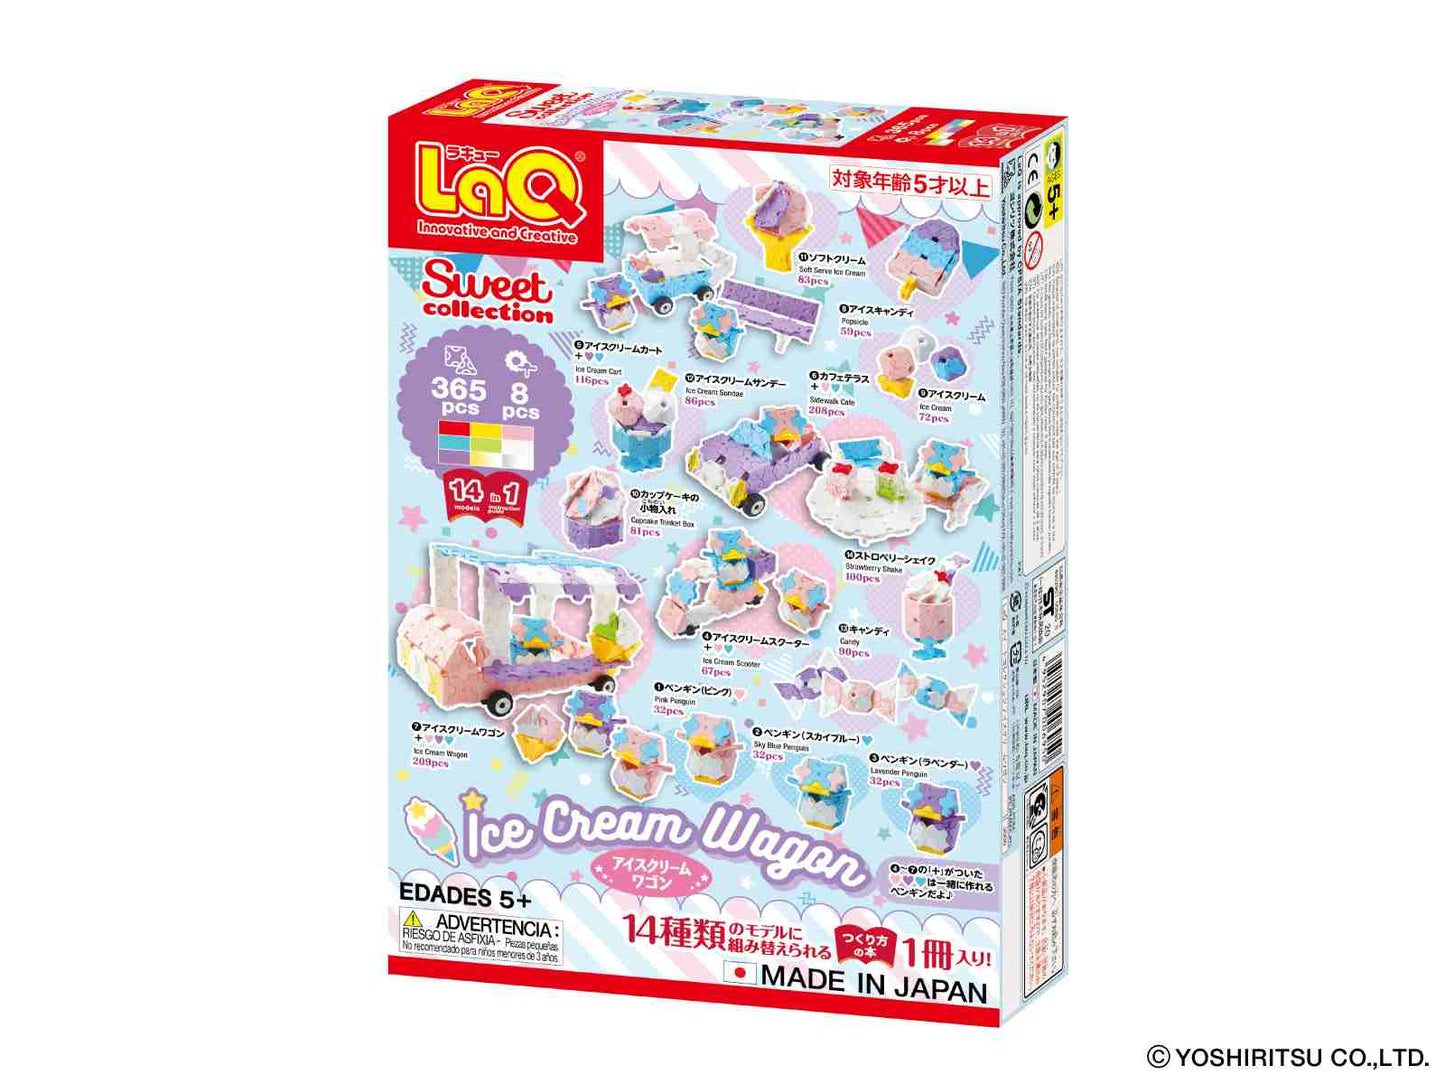 LaQ SWEET COLLECTION ICE CREAM WAGON - 14 MODELS, 365 PIECES